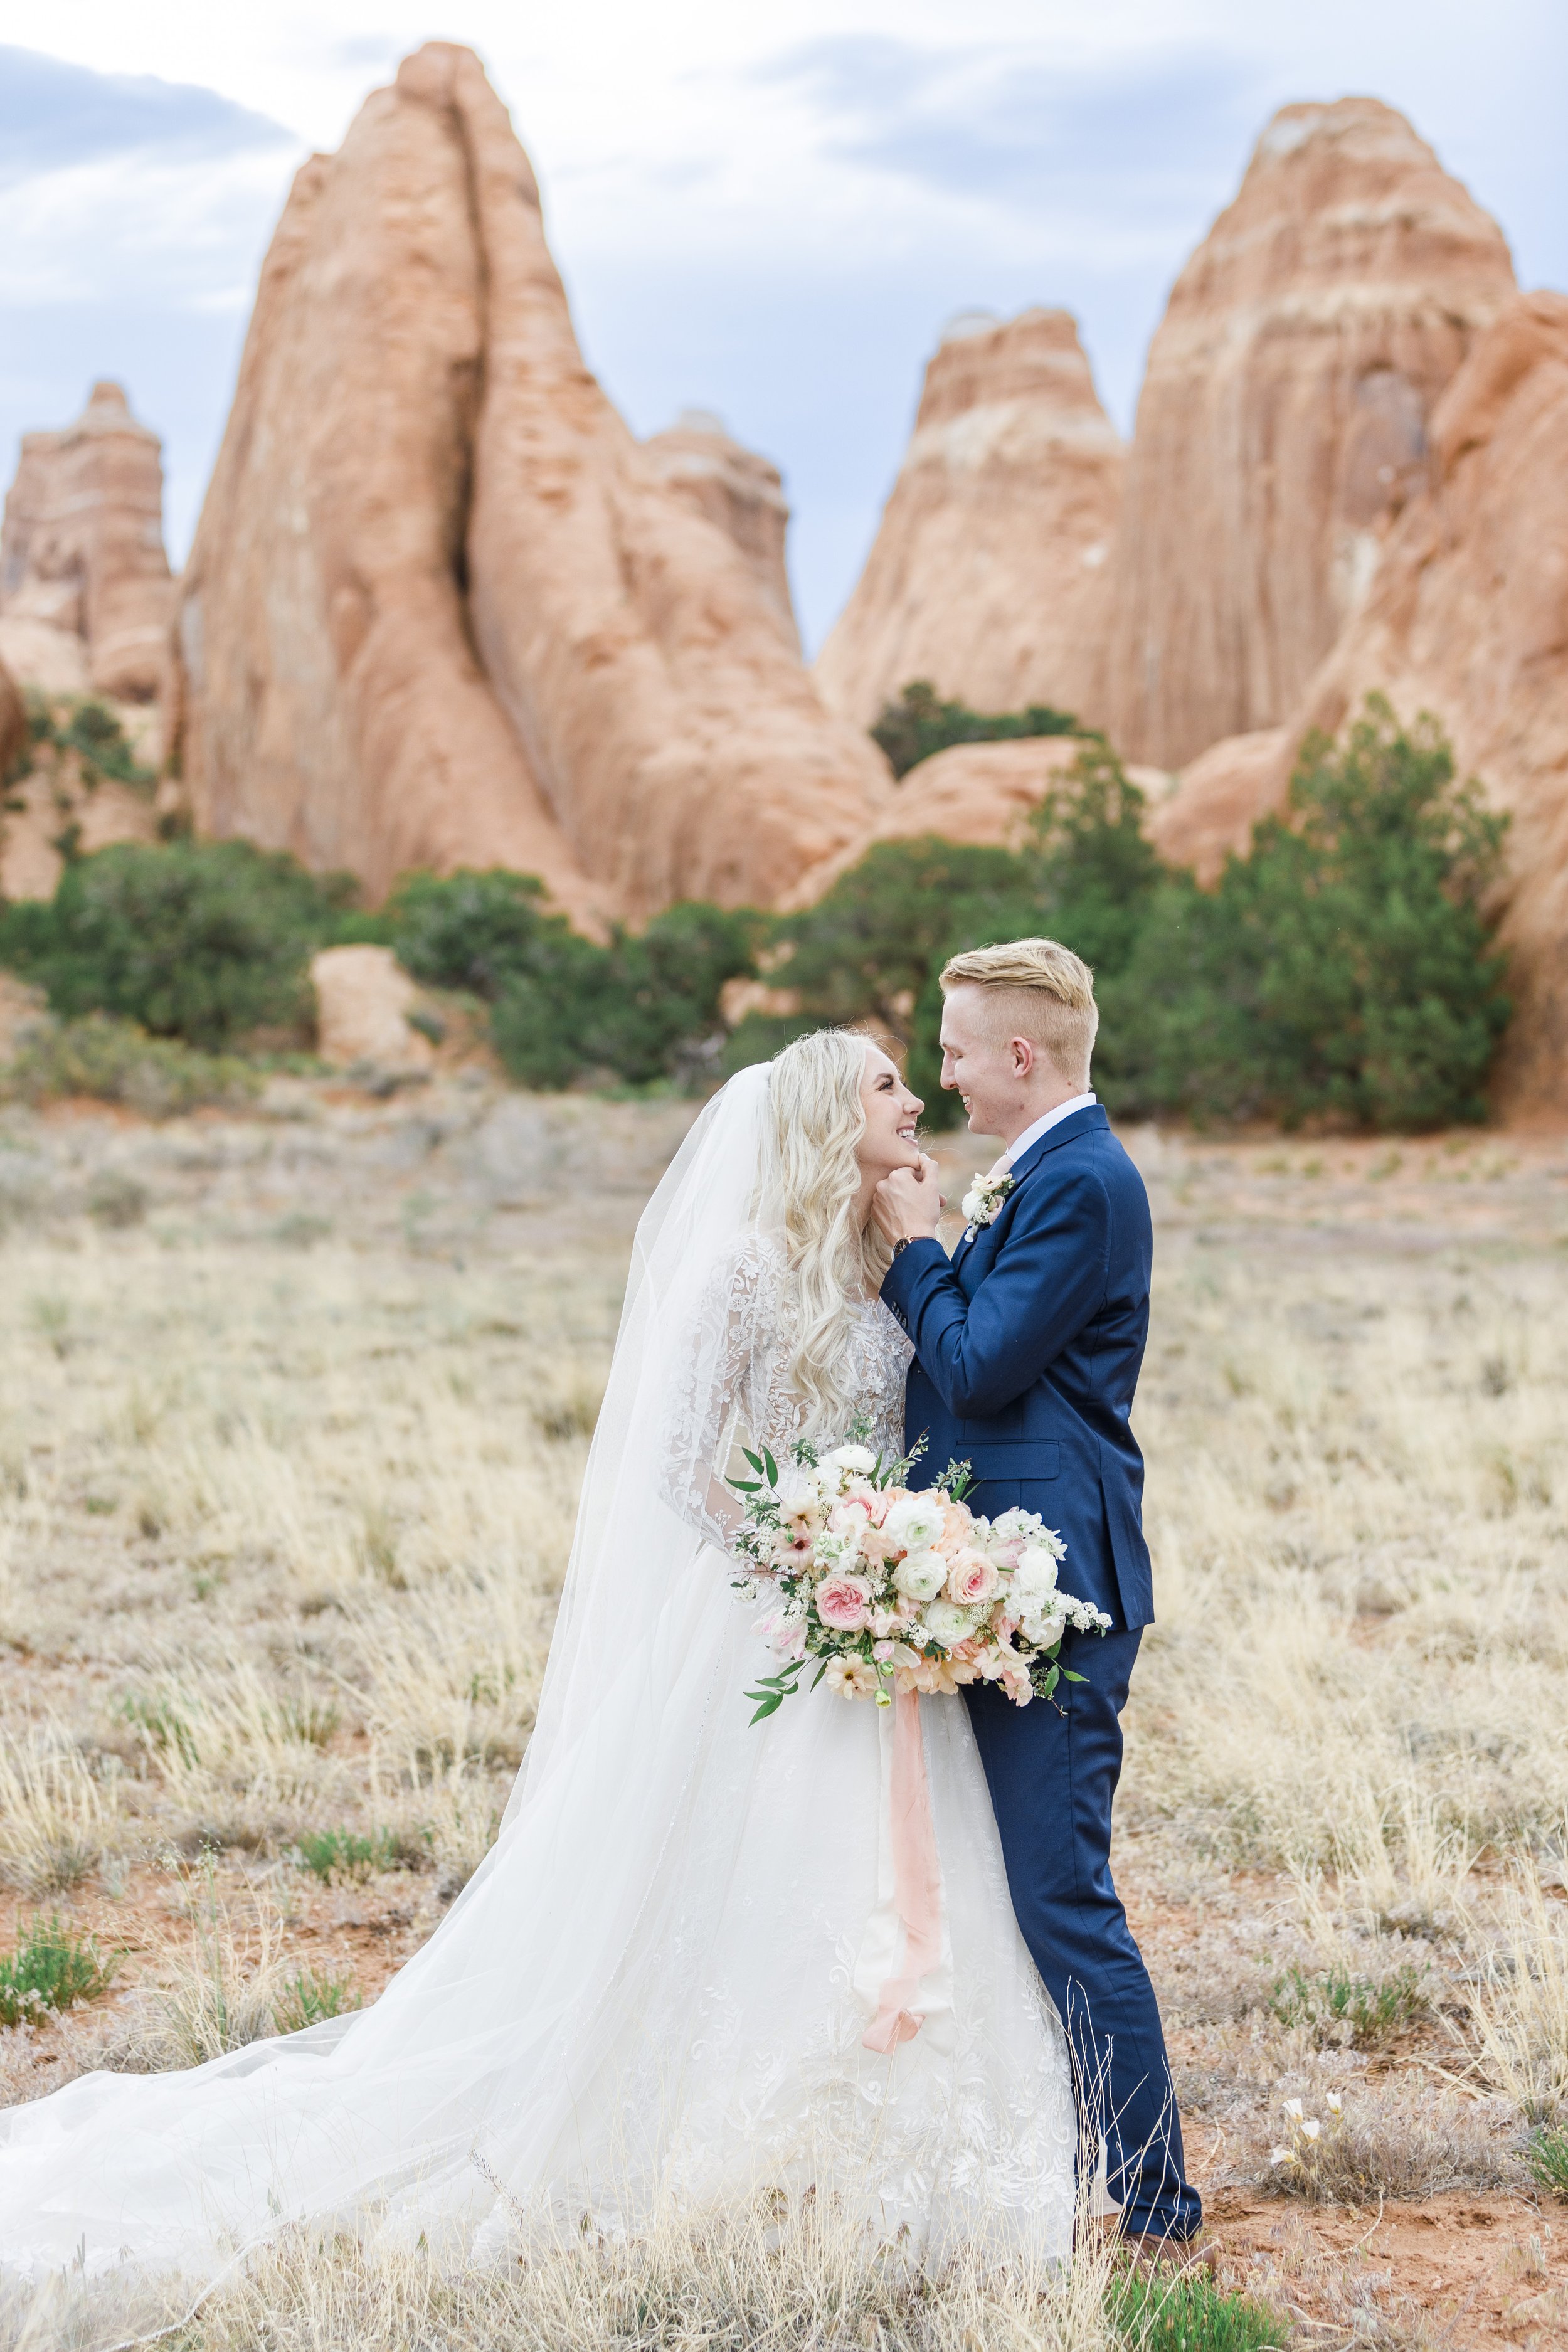  Wedding formals with the bride and groom and red rock behind them by Savanna Richardson Photography. pink rock formals #SavannaRichardsonPhotography #SavannaRichardsonWeddings #bridals #formals #bouquets #Utahweddingphotographers #Wedding 